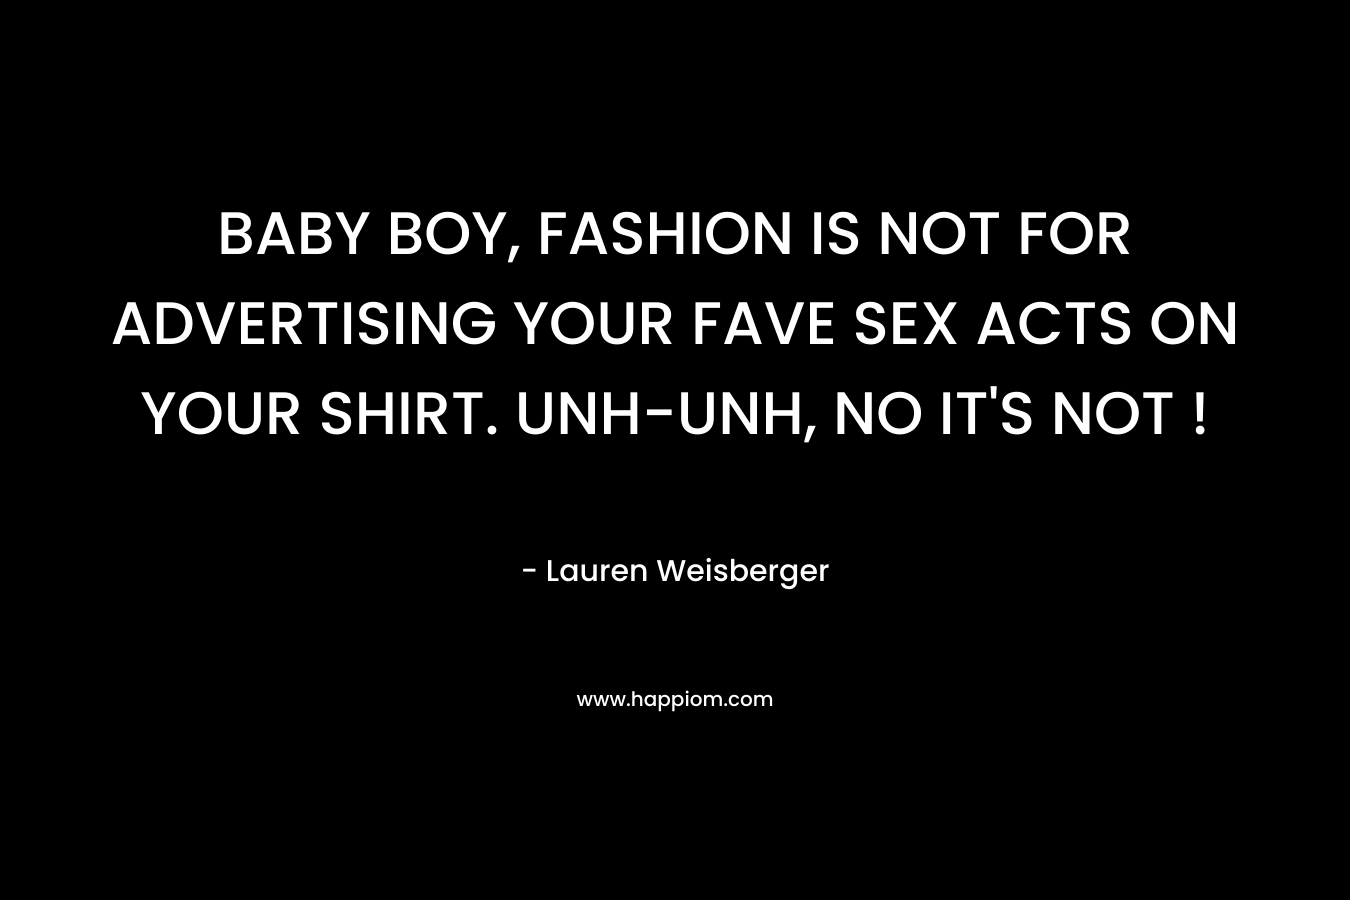 BABY BOY, FASHION IS NOT FOR ADVERTISING YOUR FAVE SEX ACTS ON YOUR SHIRT. UNH-UNH, NO IT’S NOT ! – Lauren Weisberger